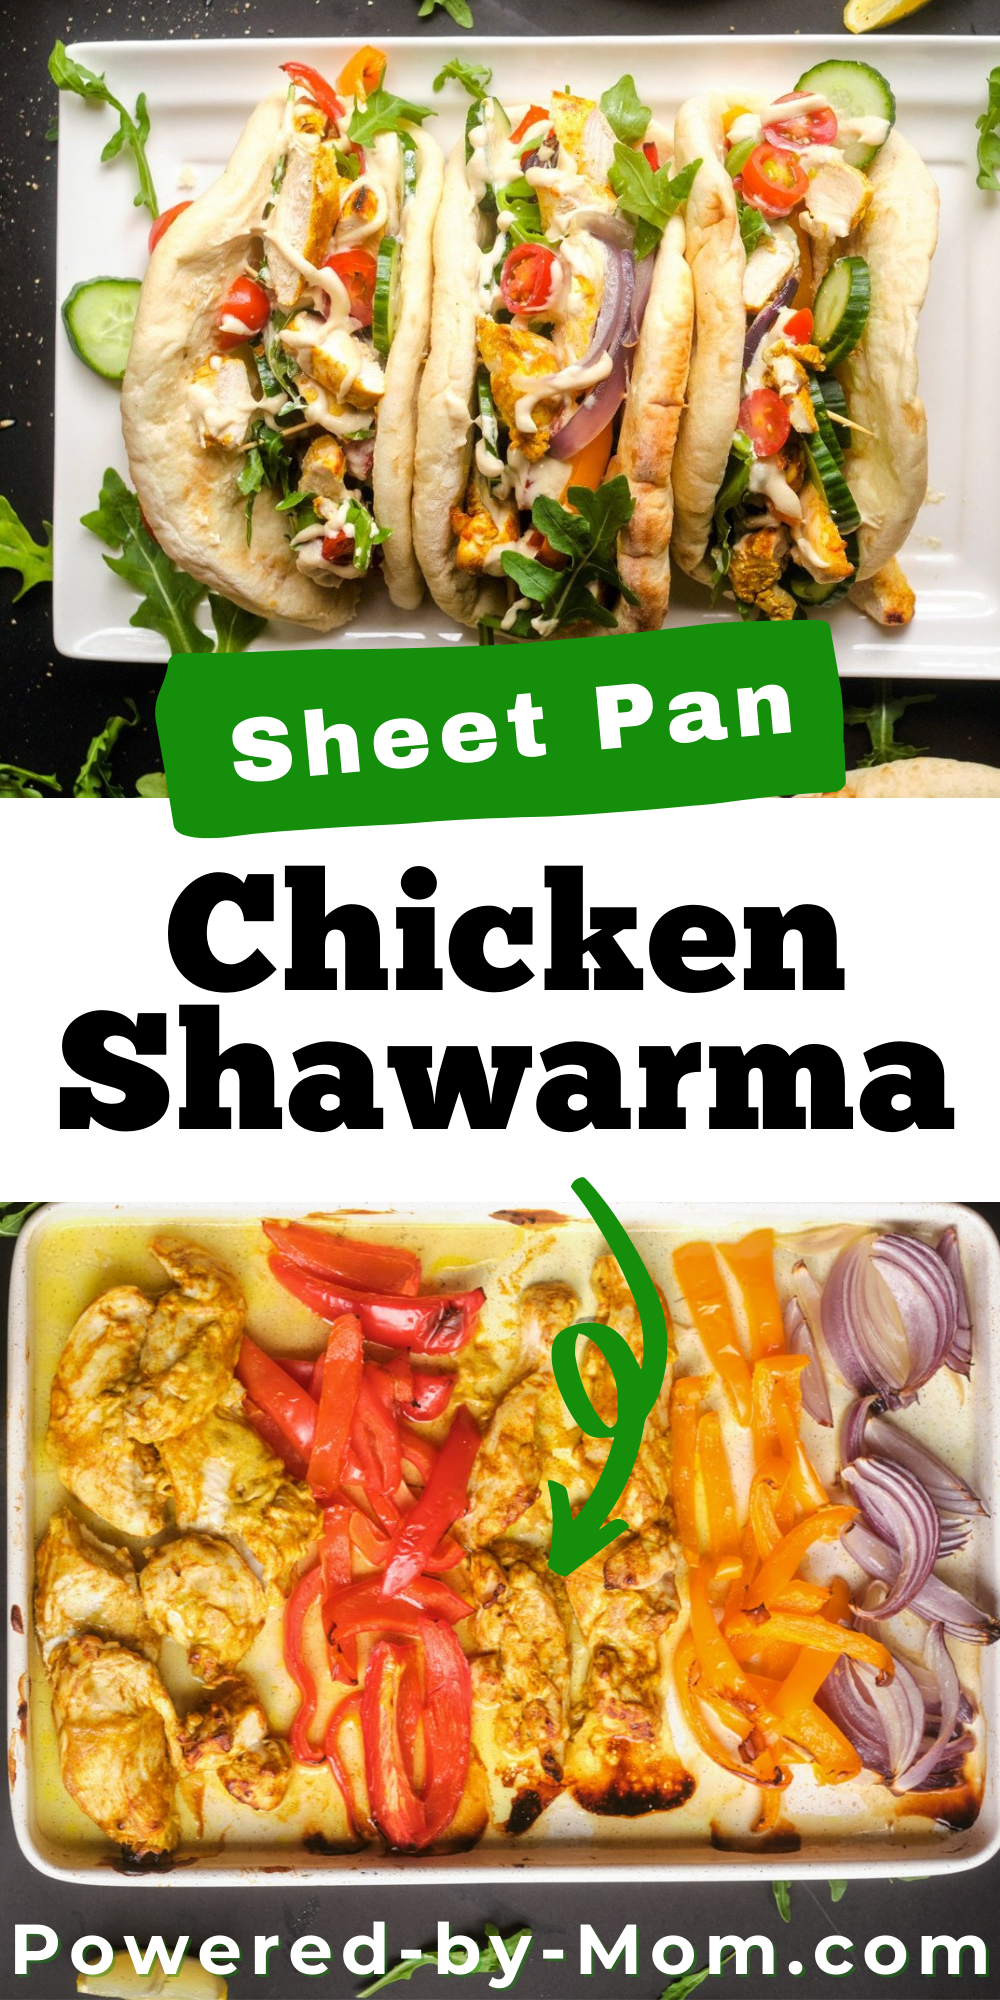 We love delicious and flavourful recipes like this Sheet Pan Chicken Shawarma that warms us up from head to toe in these colder months. We took our Delicious Chicken Shawarma Bowl Recipe and made a few tweaks so that the chicken would stay tender while being cooked in the oven on a sheet pan instead of a skillet. The result was yummy chicken that when put on top of naan or pita, your favourite toppings and finished with our tahini sauce makes one tasty meal!